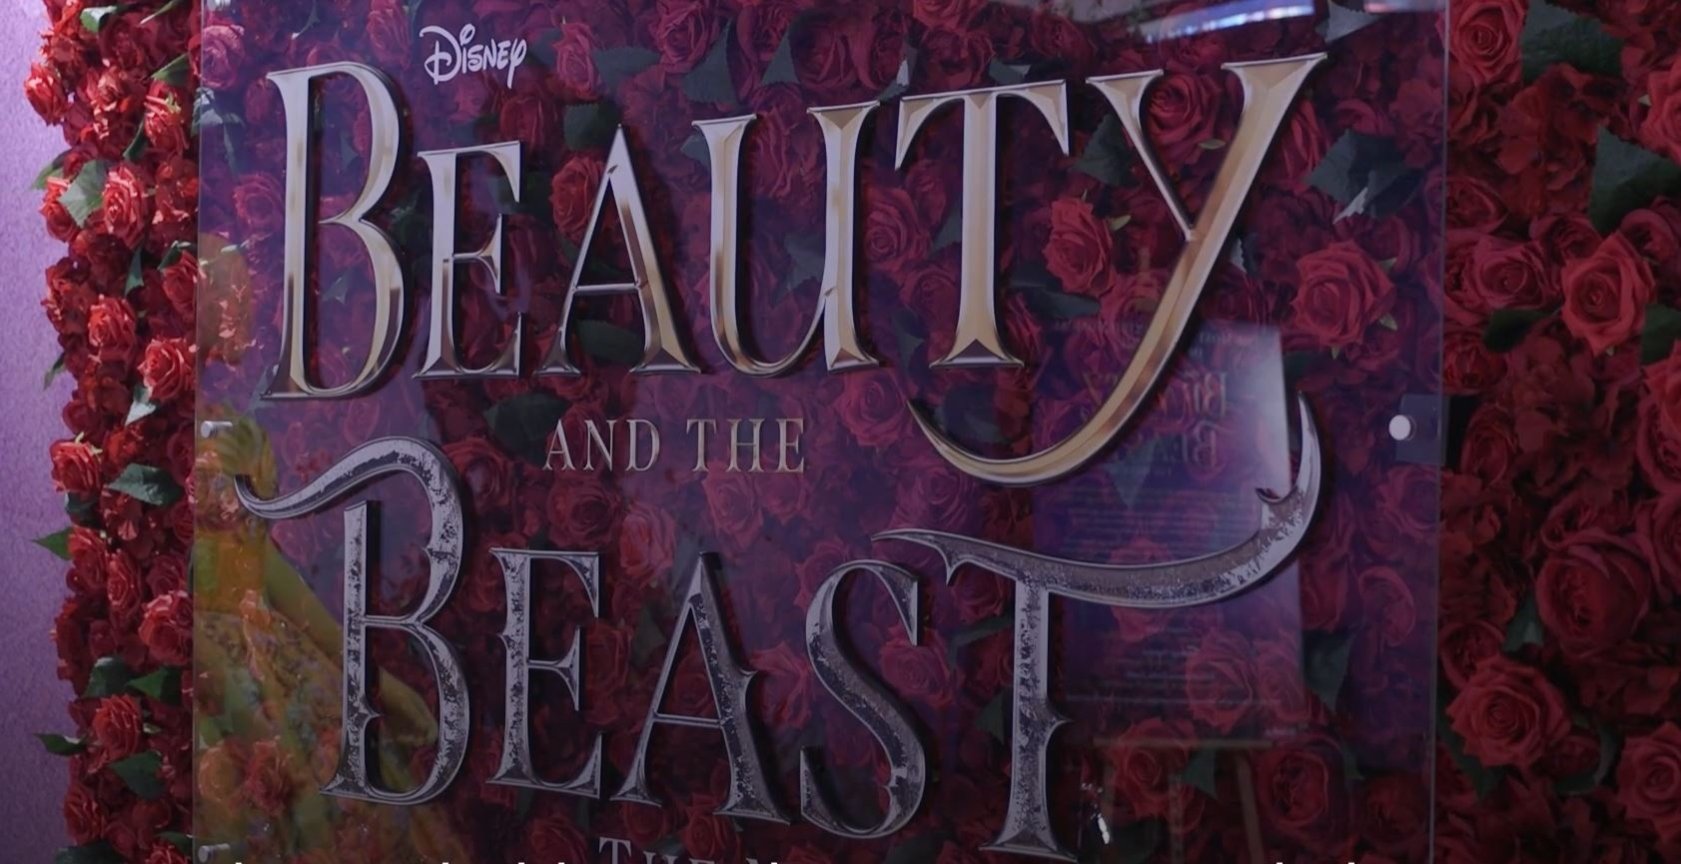 'Beauty and the Beast' sign